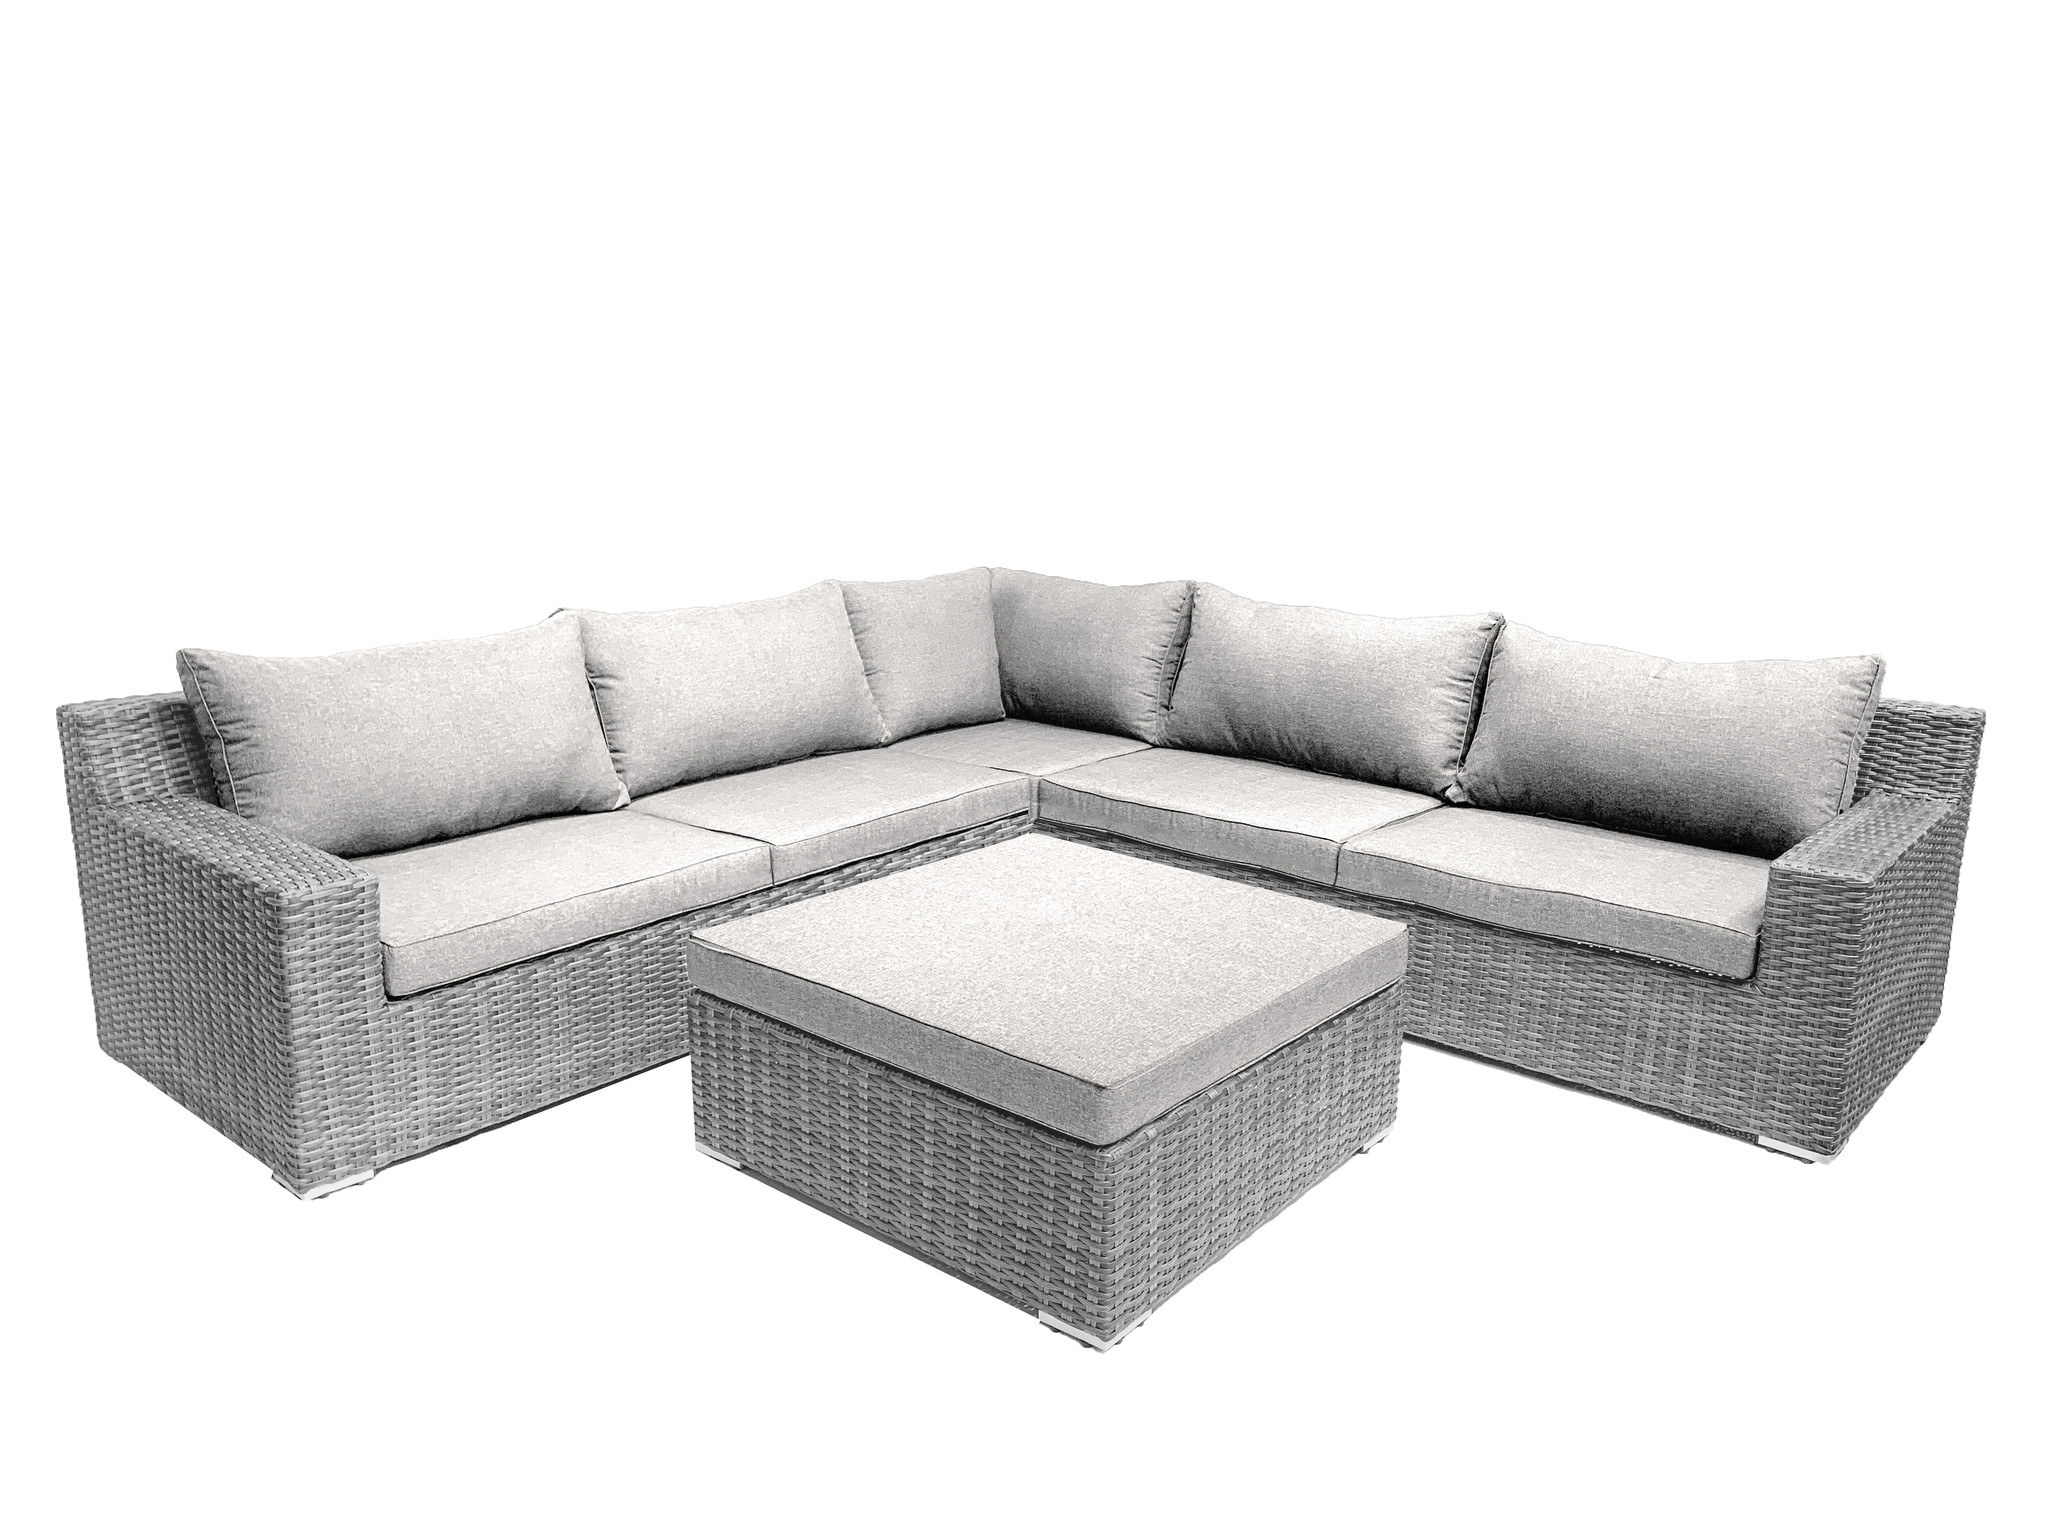 7-person lounge set Colorado - cushions Blended Yellow | Webshop Furniture | Gray with Garden Garden beige